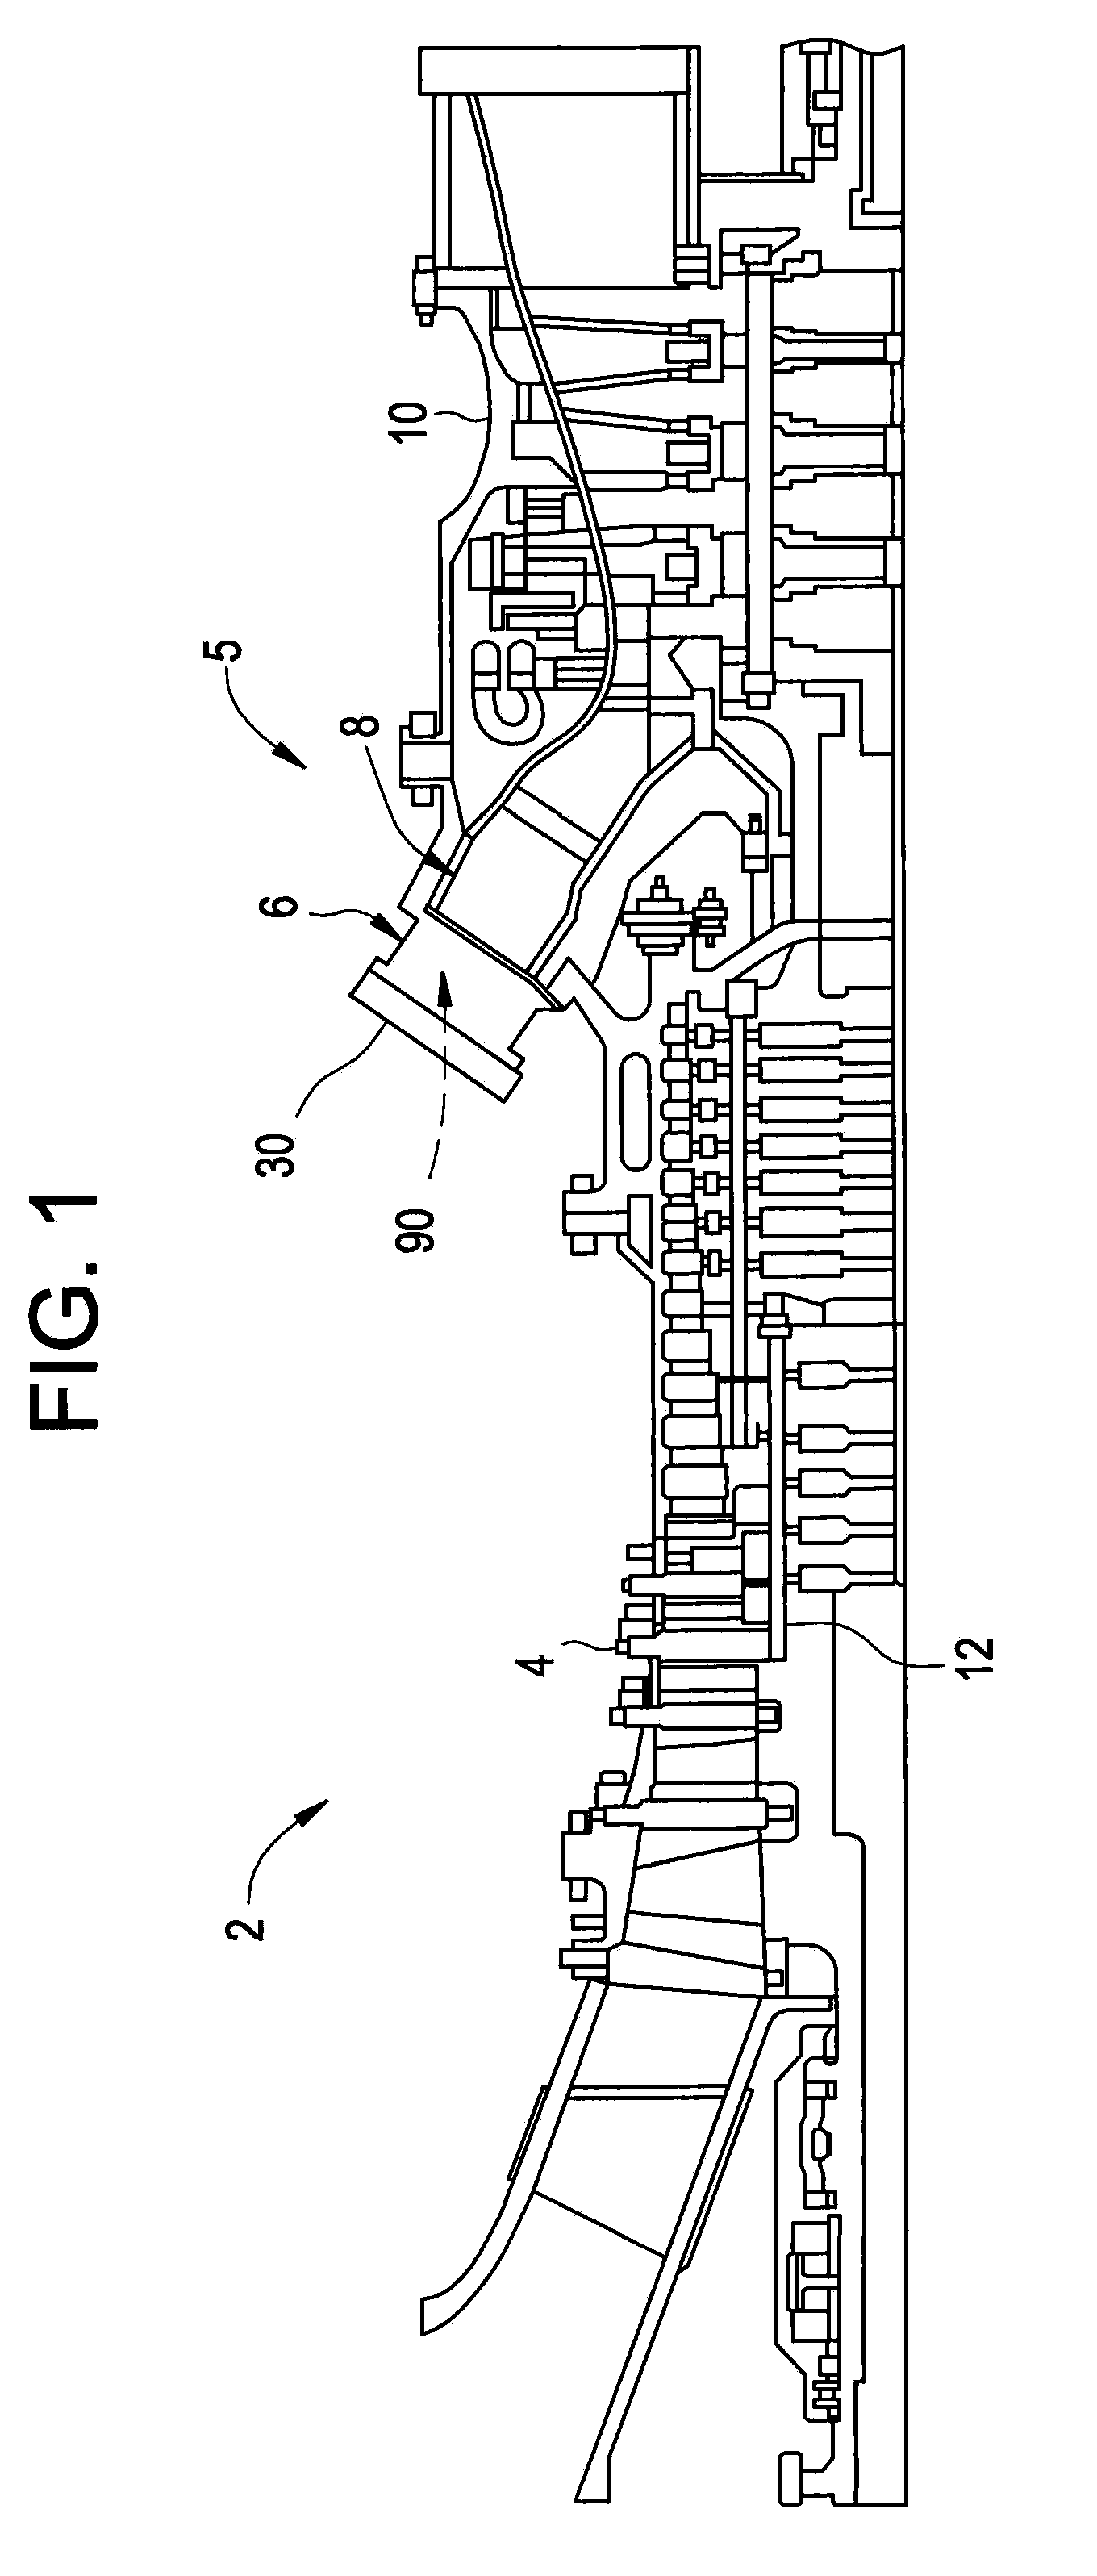 System and method for reducing combustion dynamics in a turbomachine